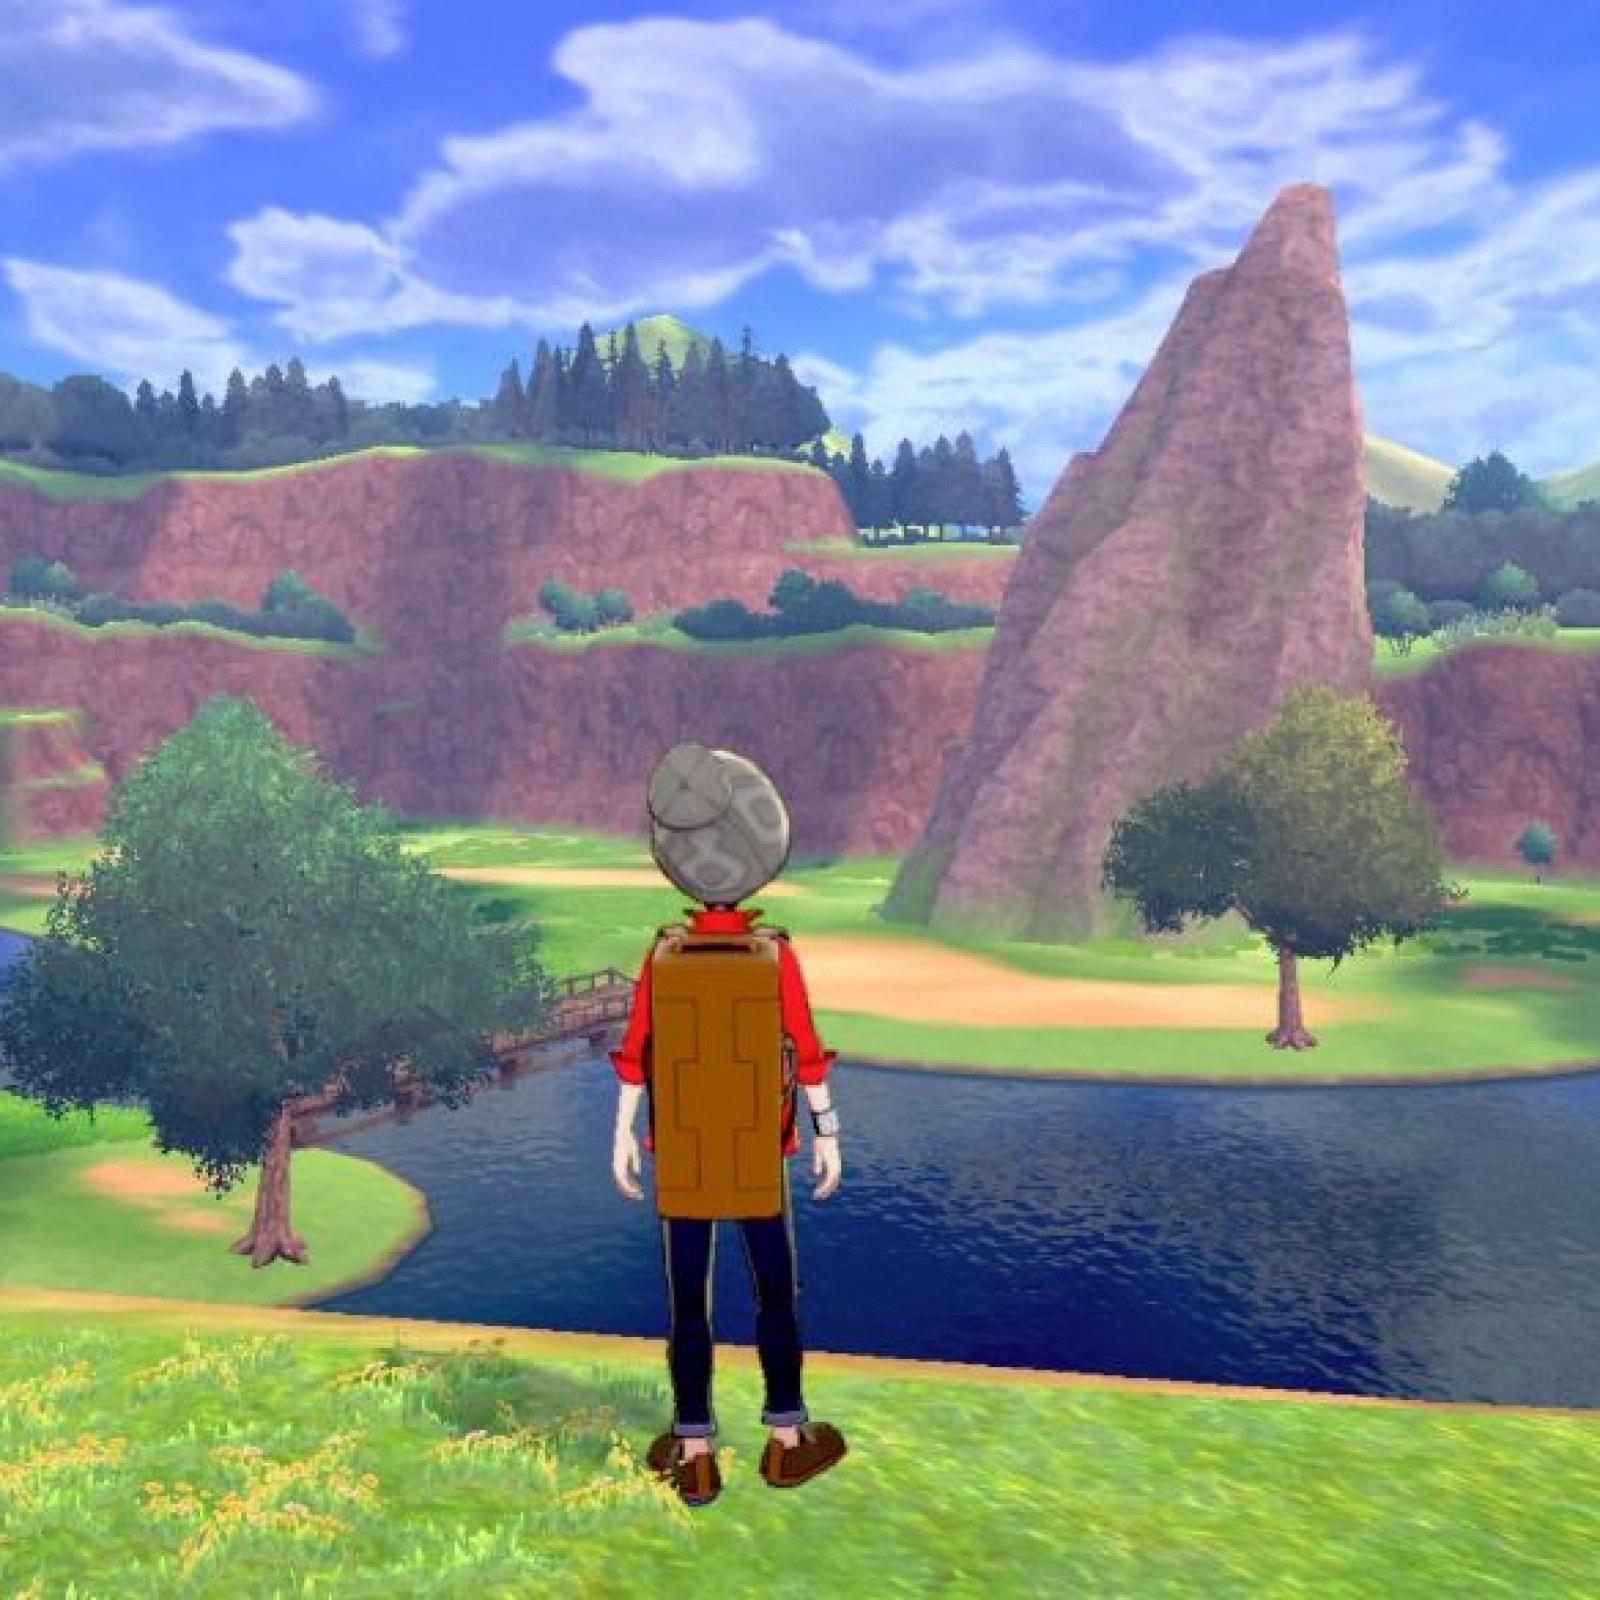 New 'Pokémon Sword and Shield' Information to Release August 7